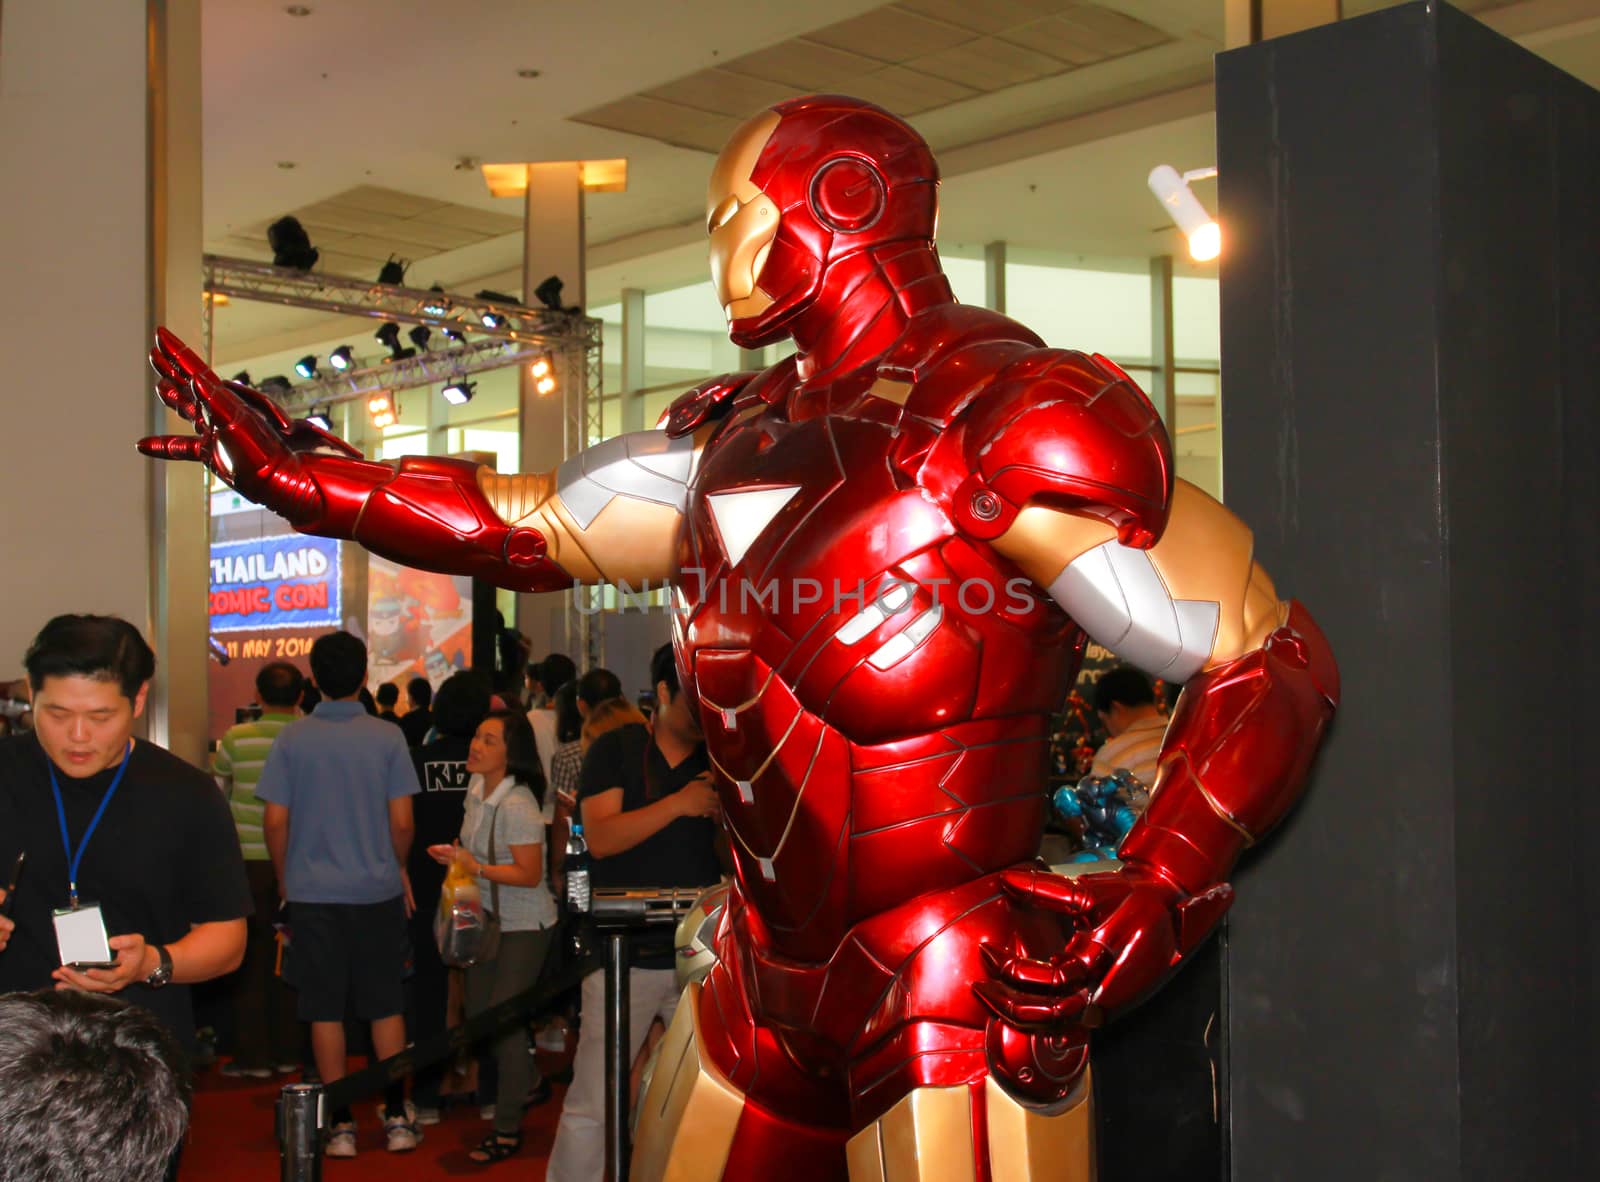 A model of the character Iron Man from the movies and comics 19 by redthirteen